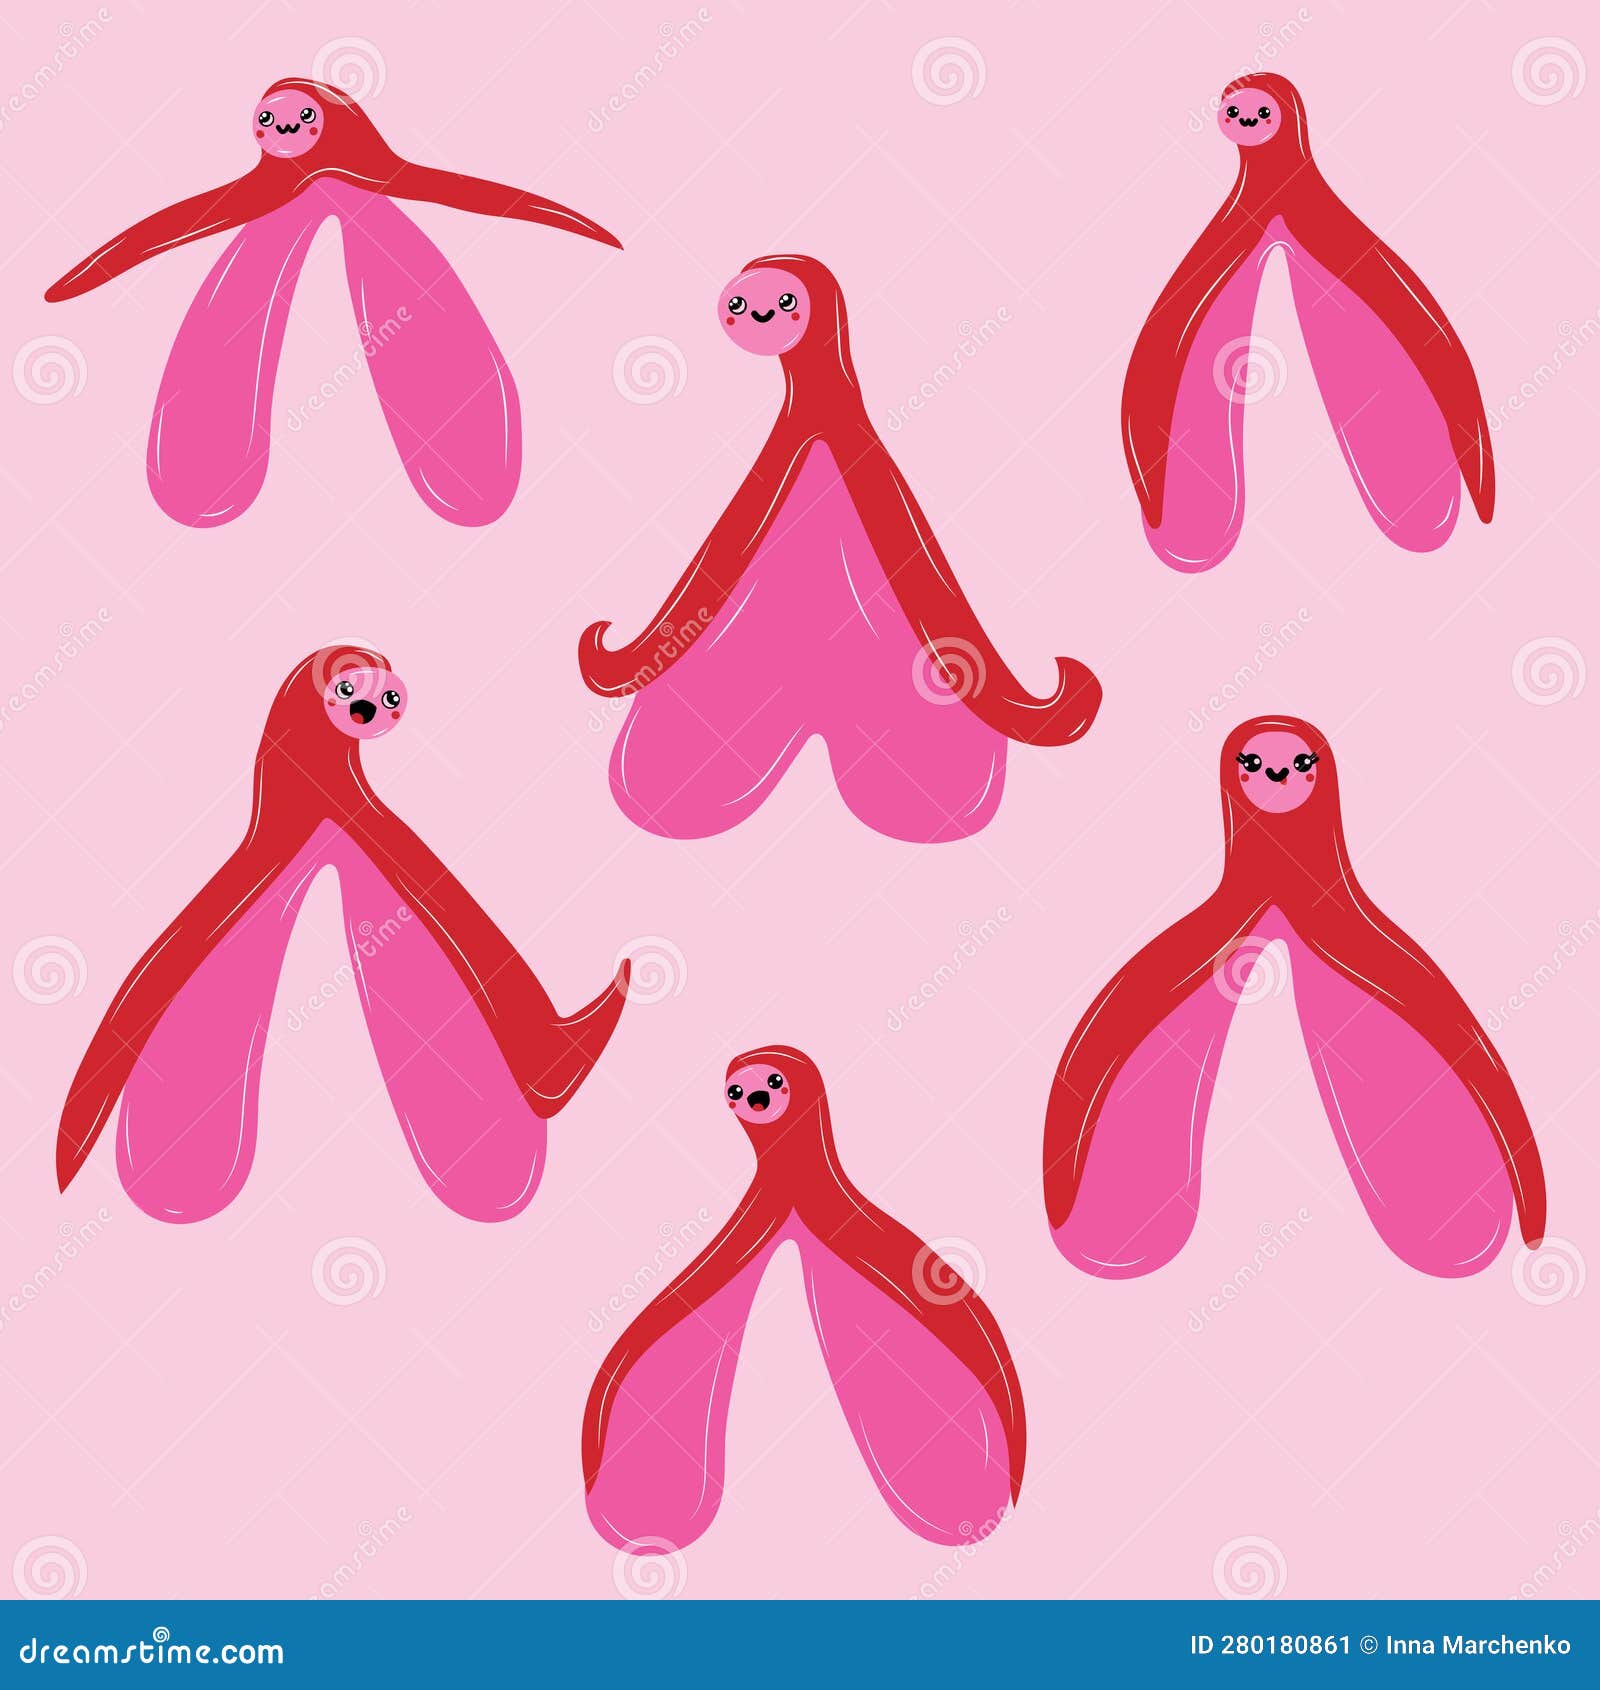 Set Of Reproductive System Of The Clitoris With Kawaii Eyes Clitoral Glans Stock Vector